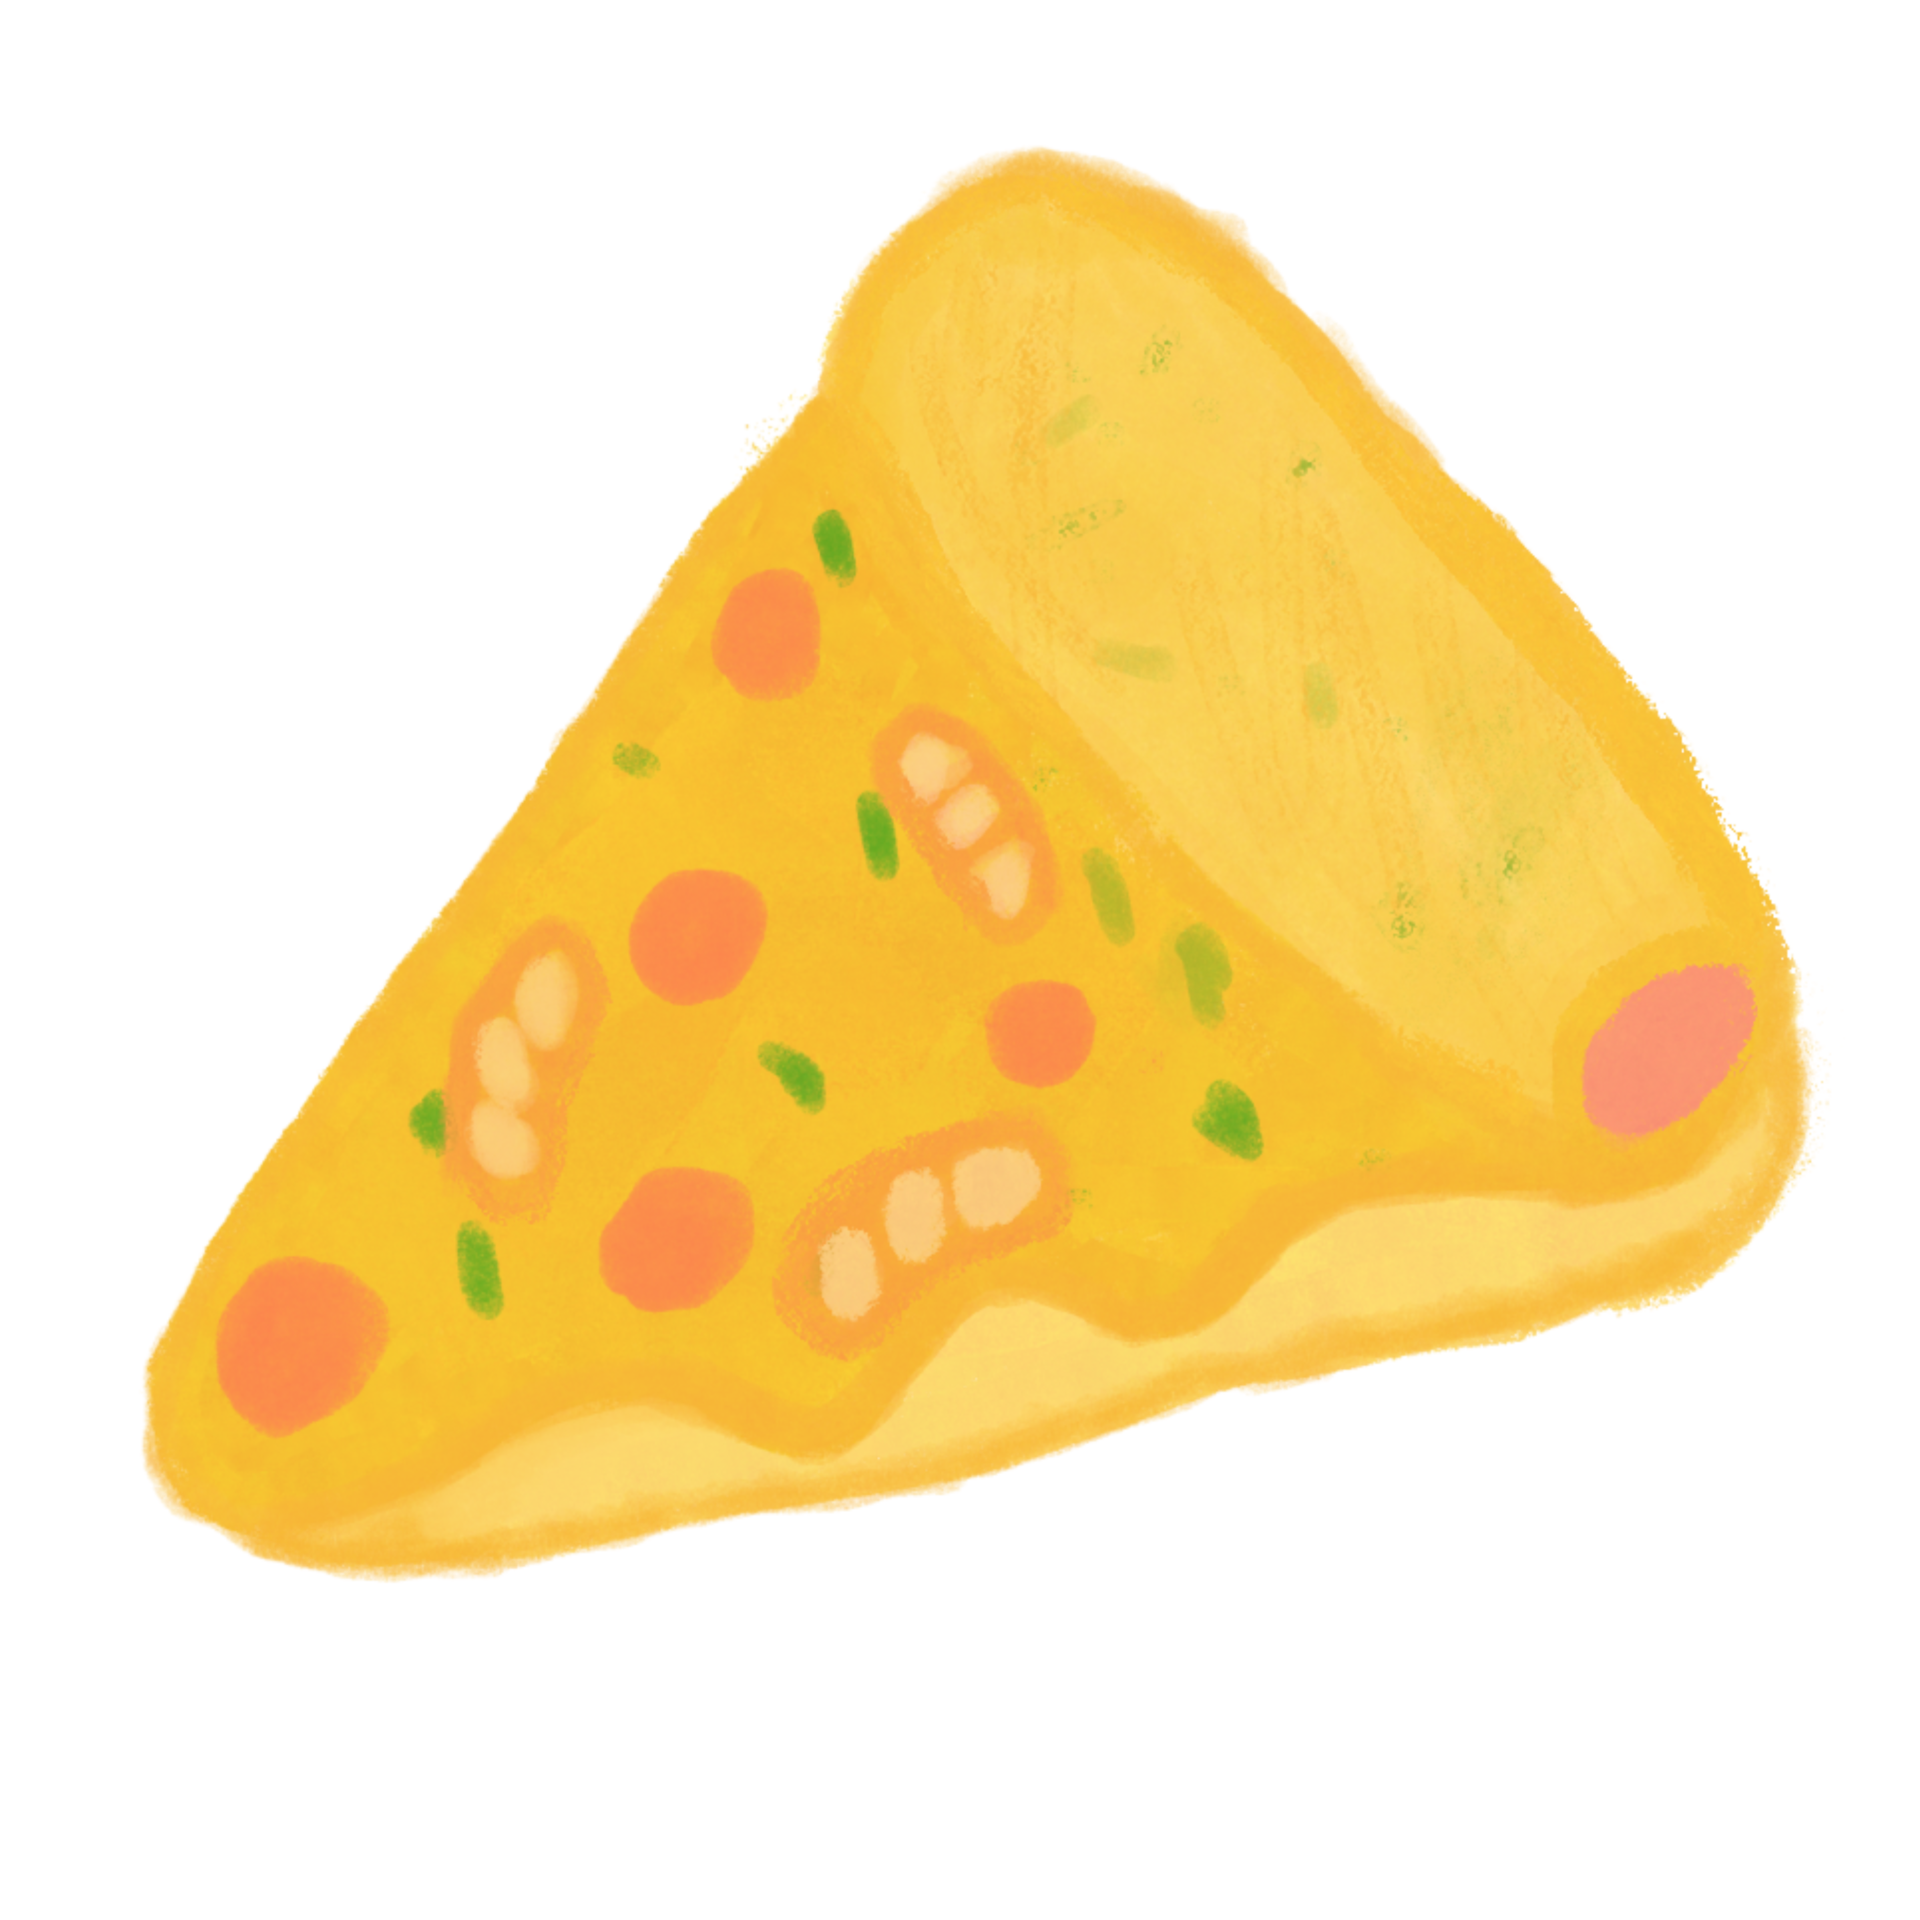 A slice of hot pizza with stretchy cheese, Slice of fresh italian